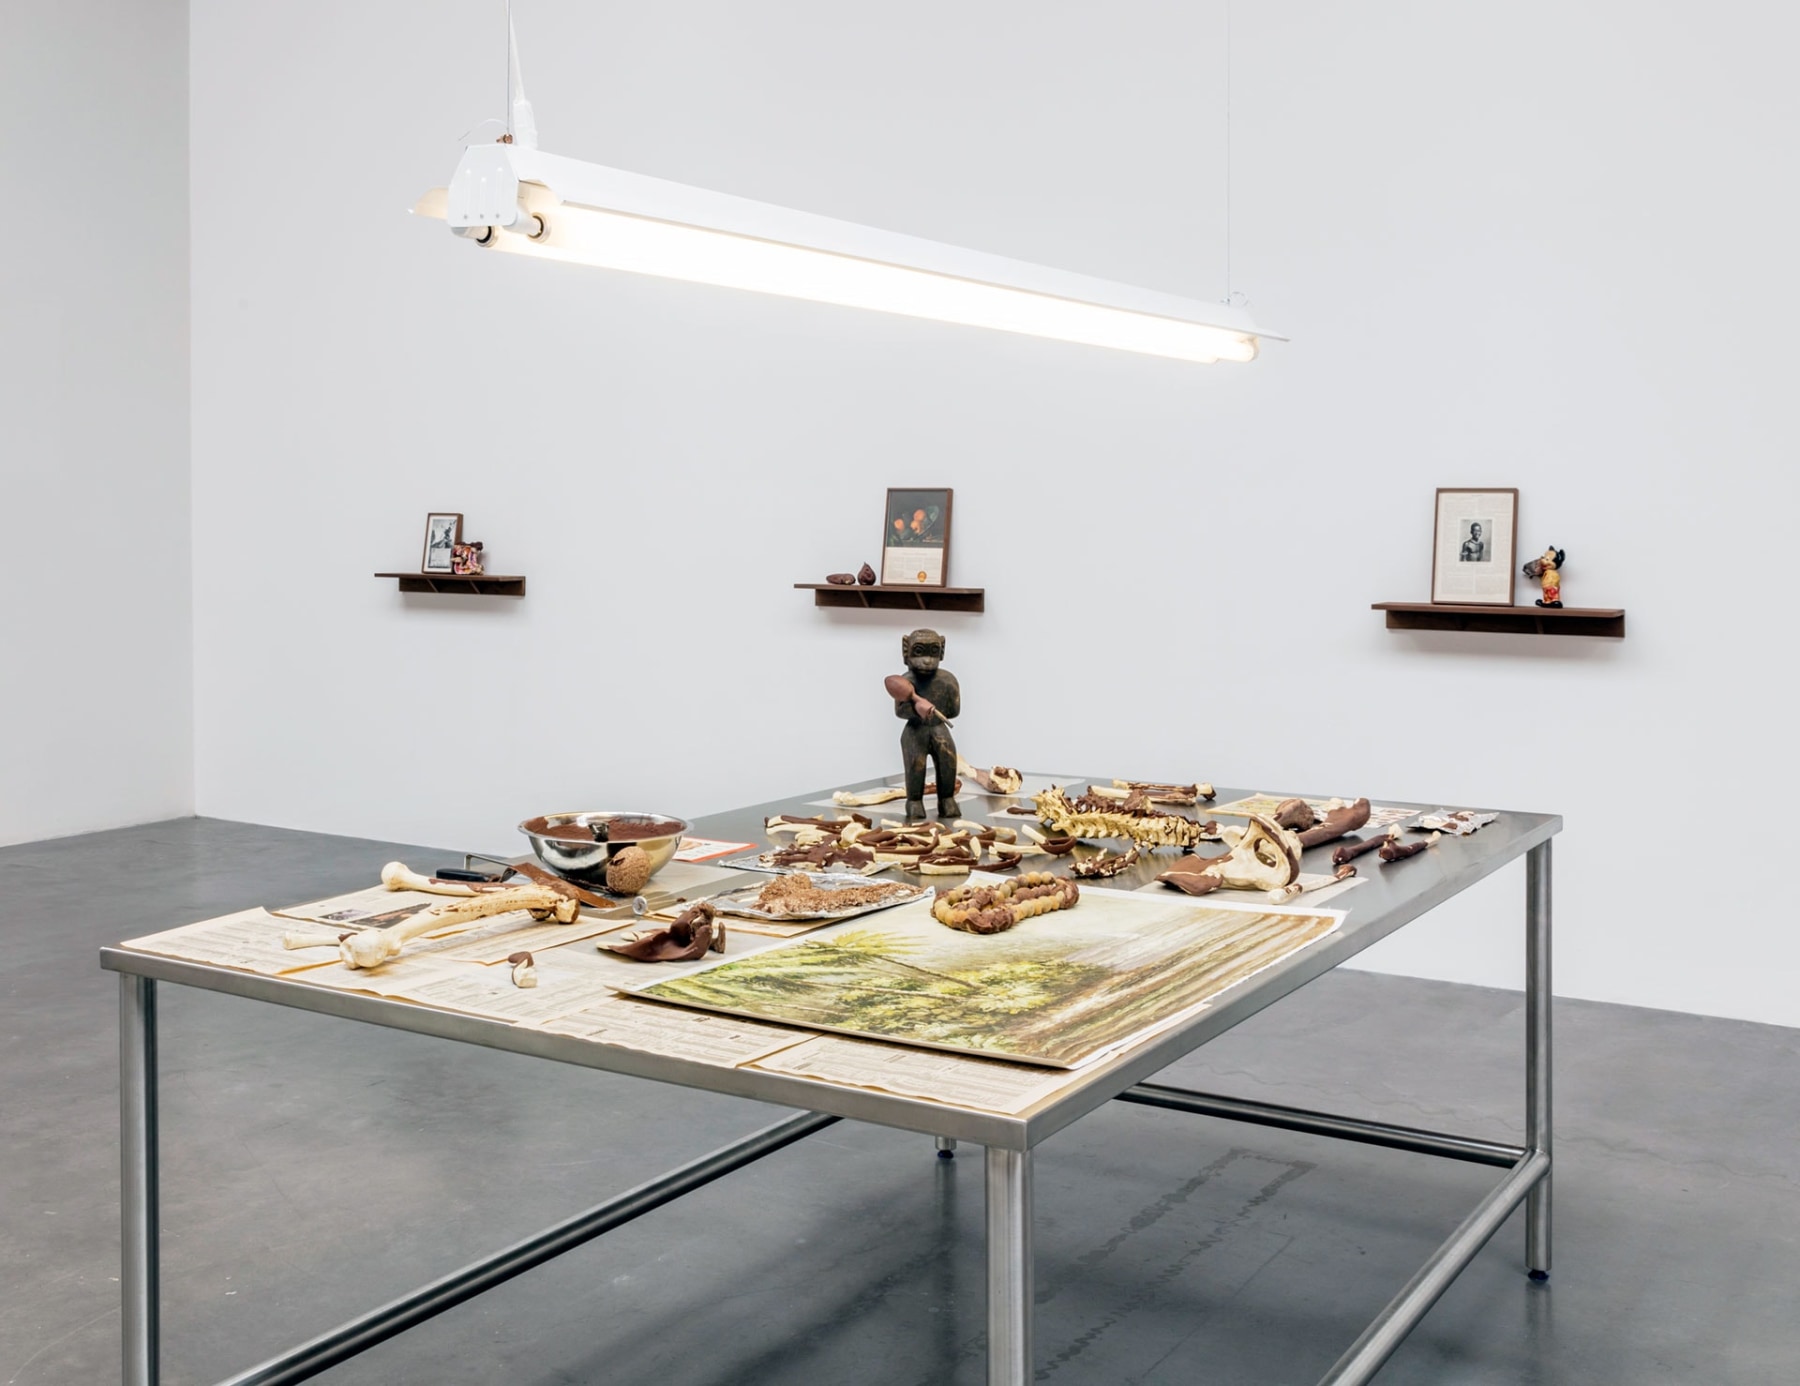 Minerva Cuevas - From the Archive - Archive - Kurimanzutto